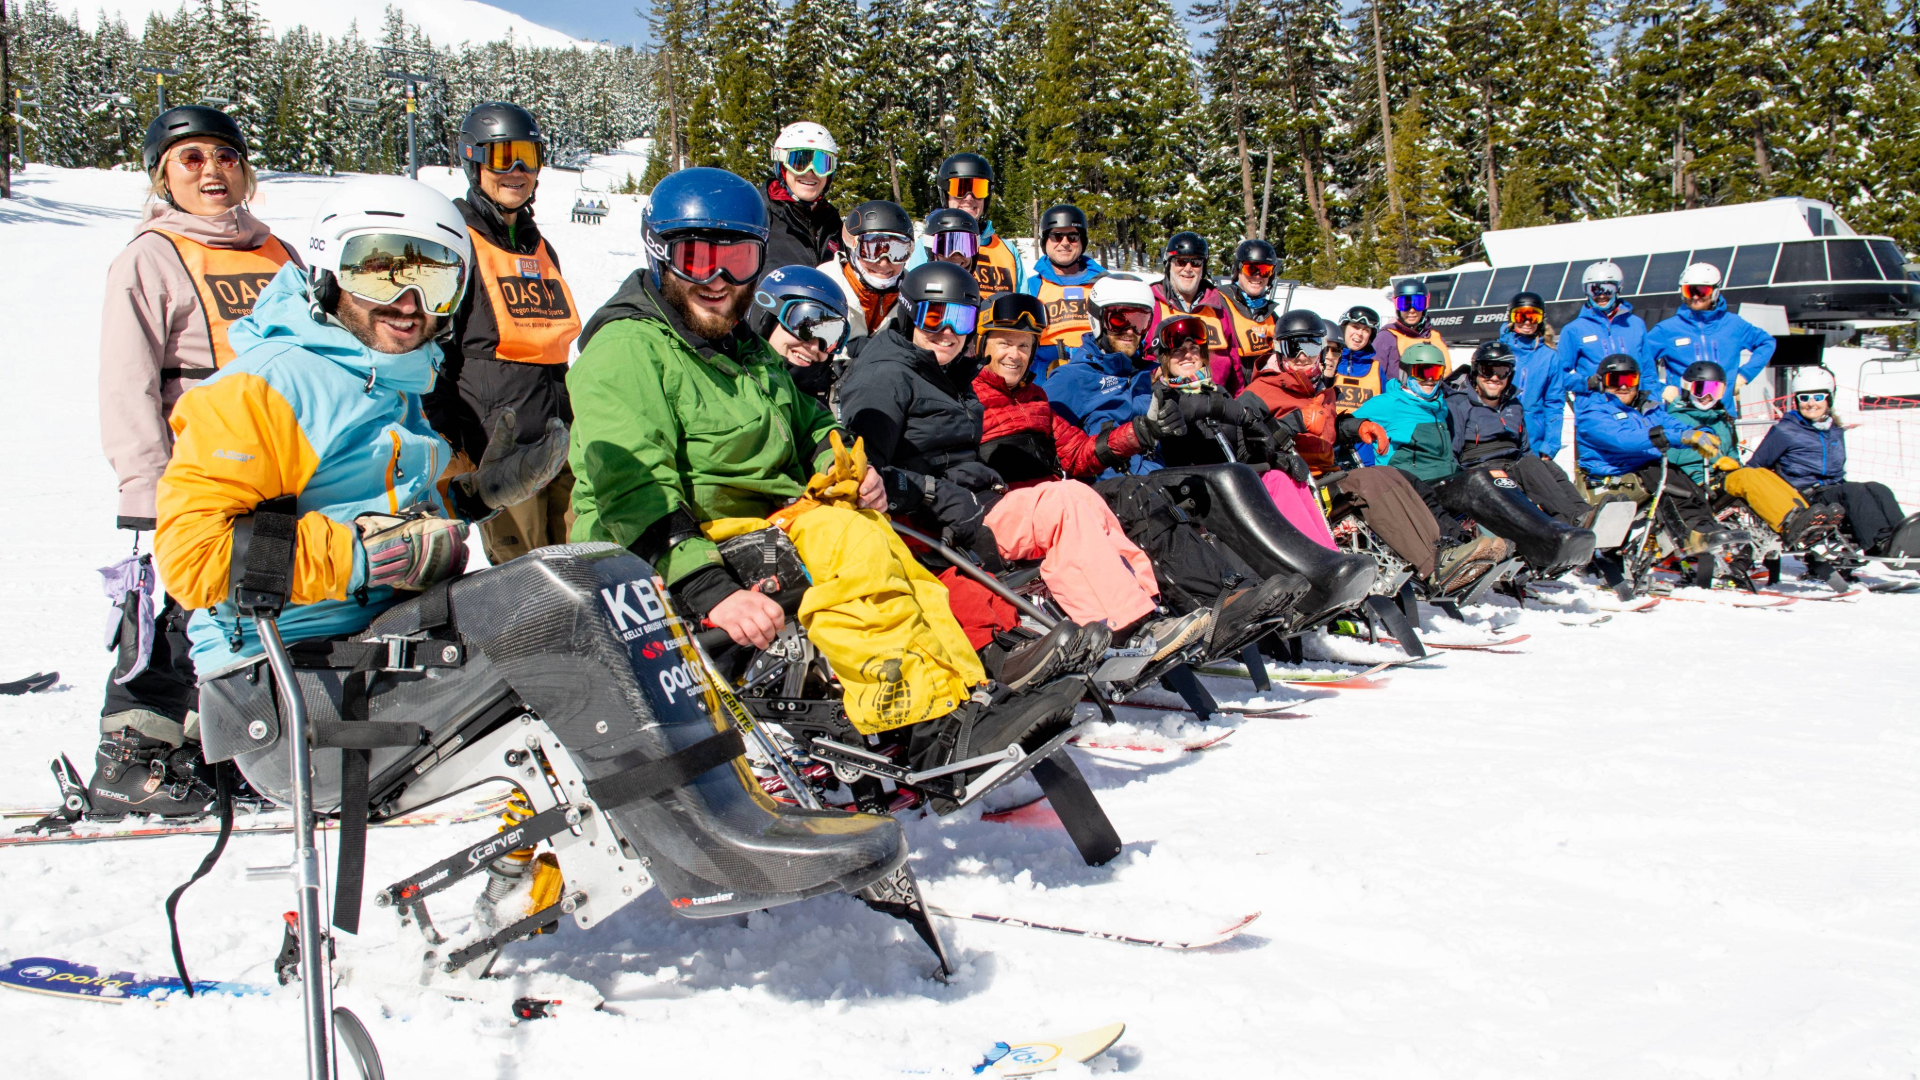 a group of 20 sit-skiers pose for a photo in a line with OAS volunteers and staffs stand behind them all smiling on a bright sunny day.